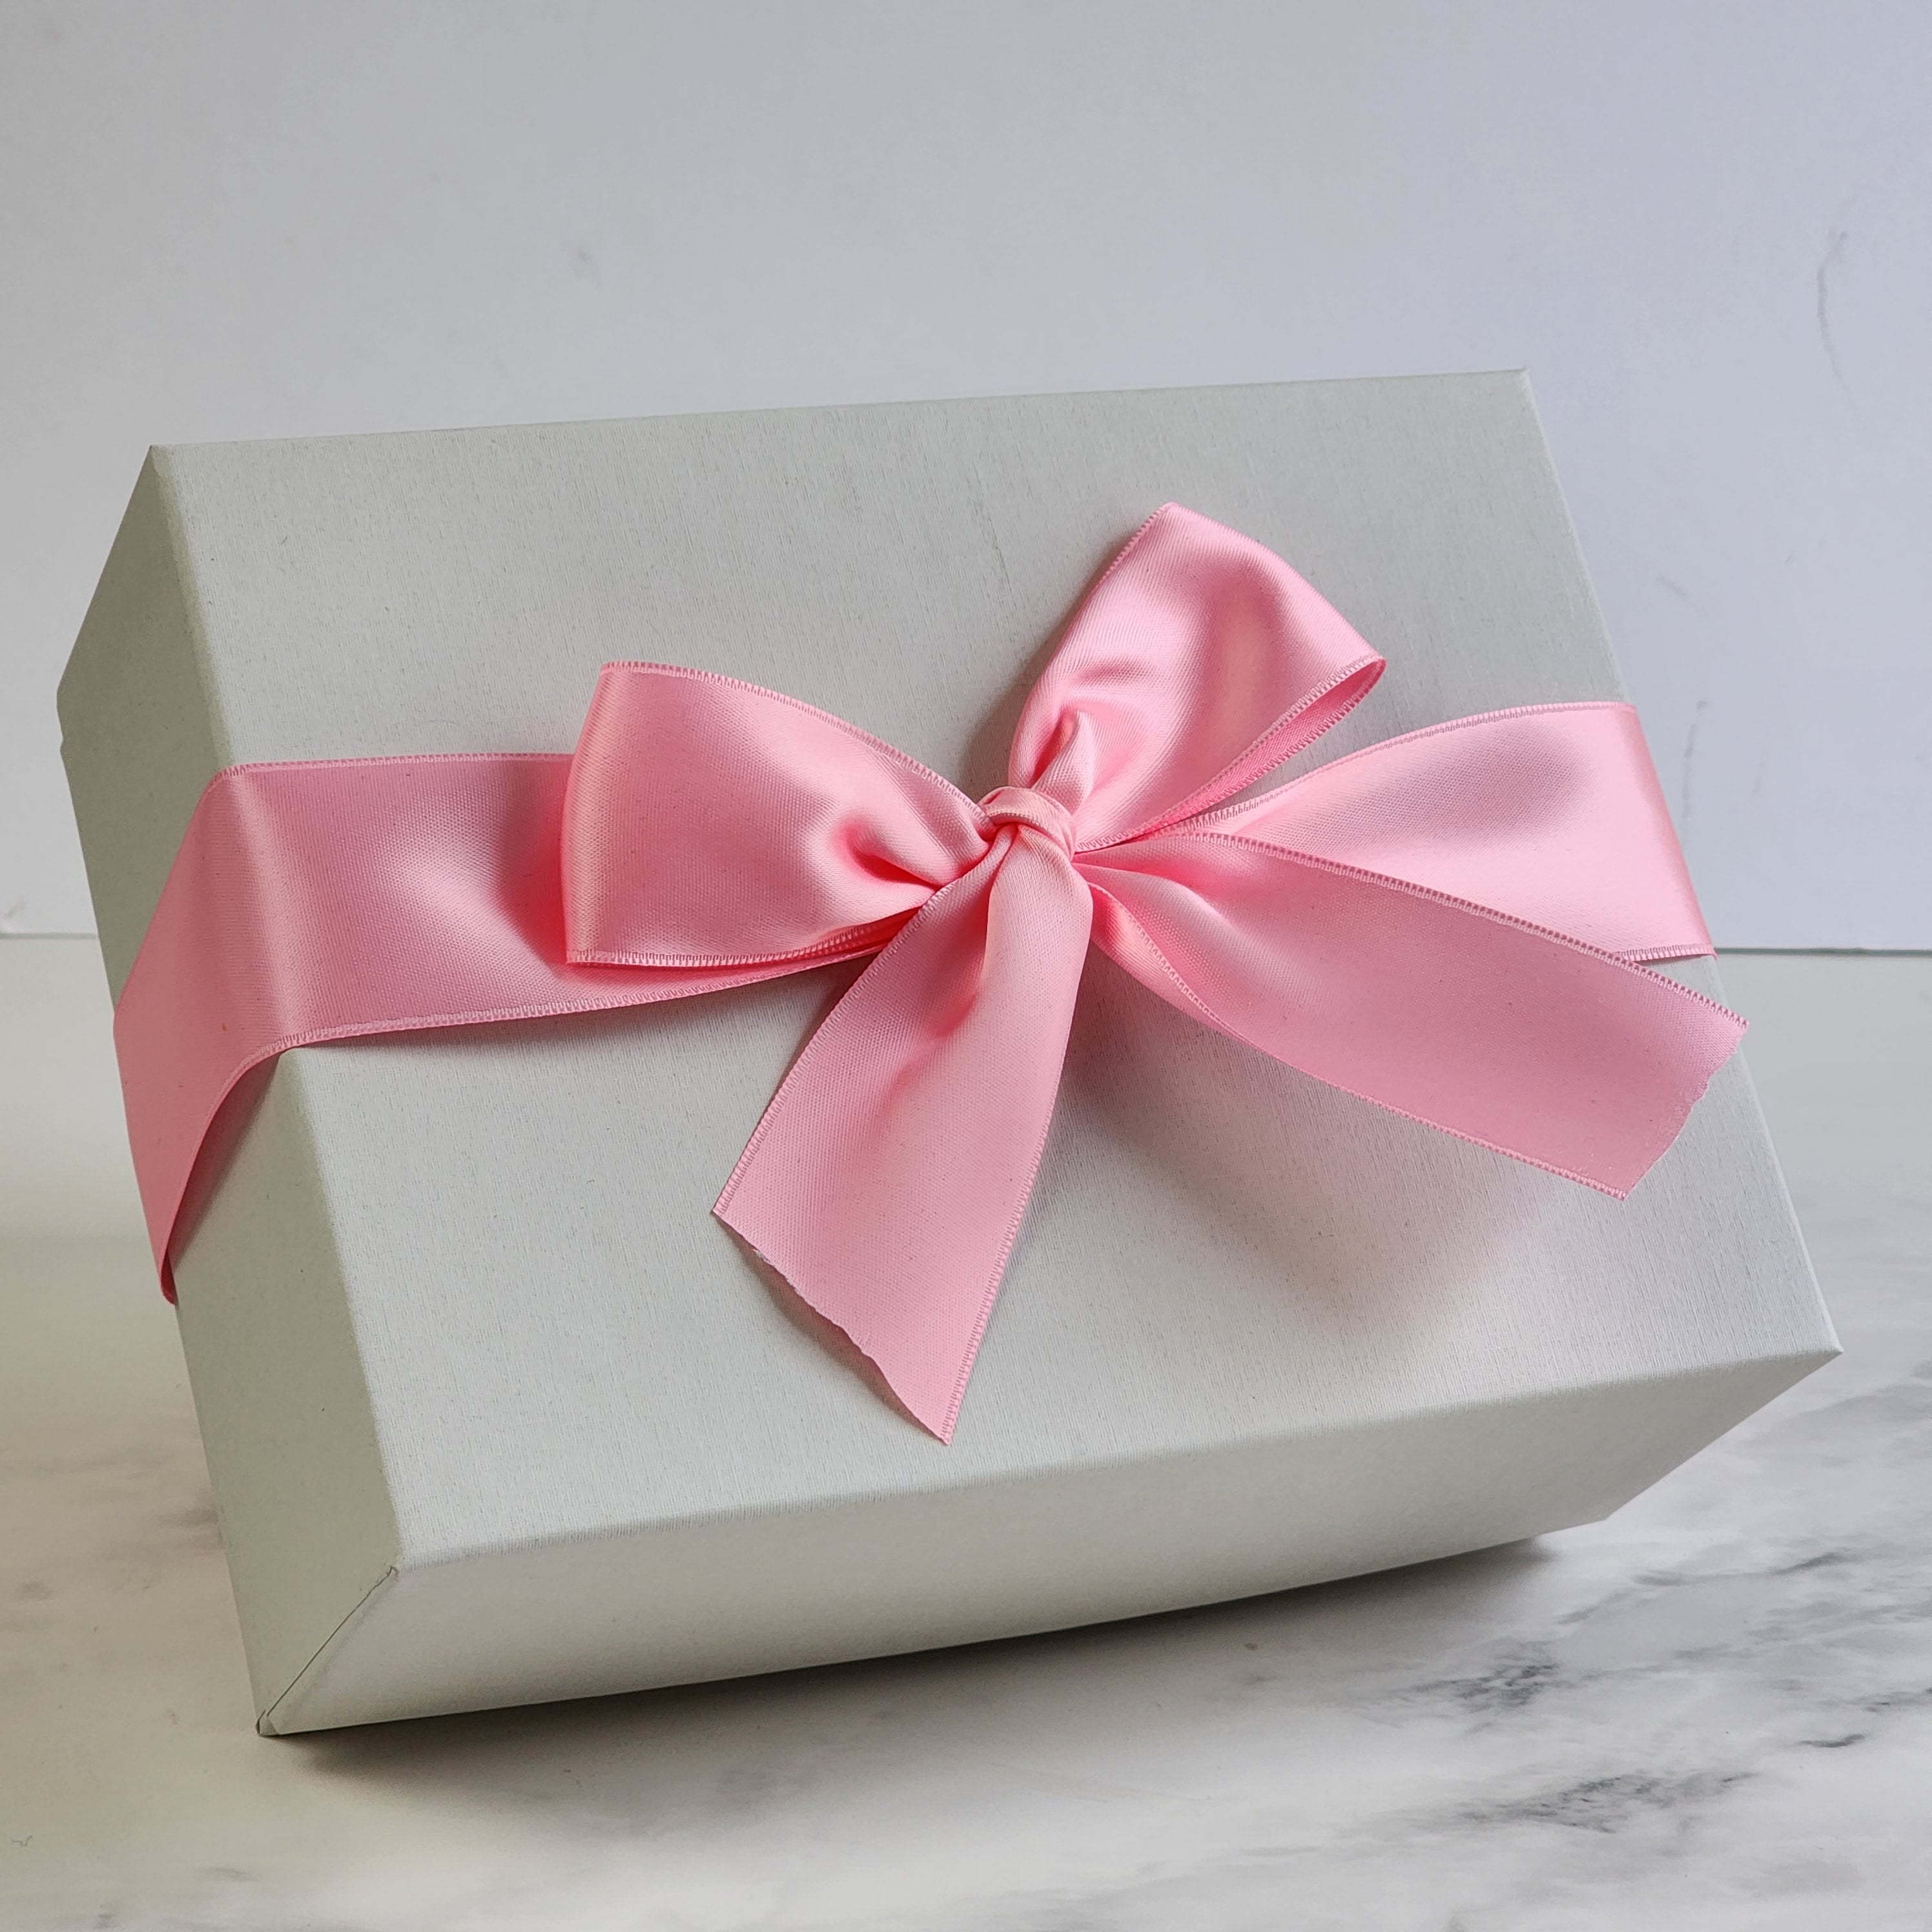 Personalized Gift Box - Mom & Baby